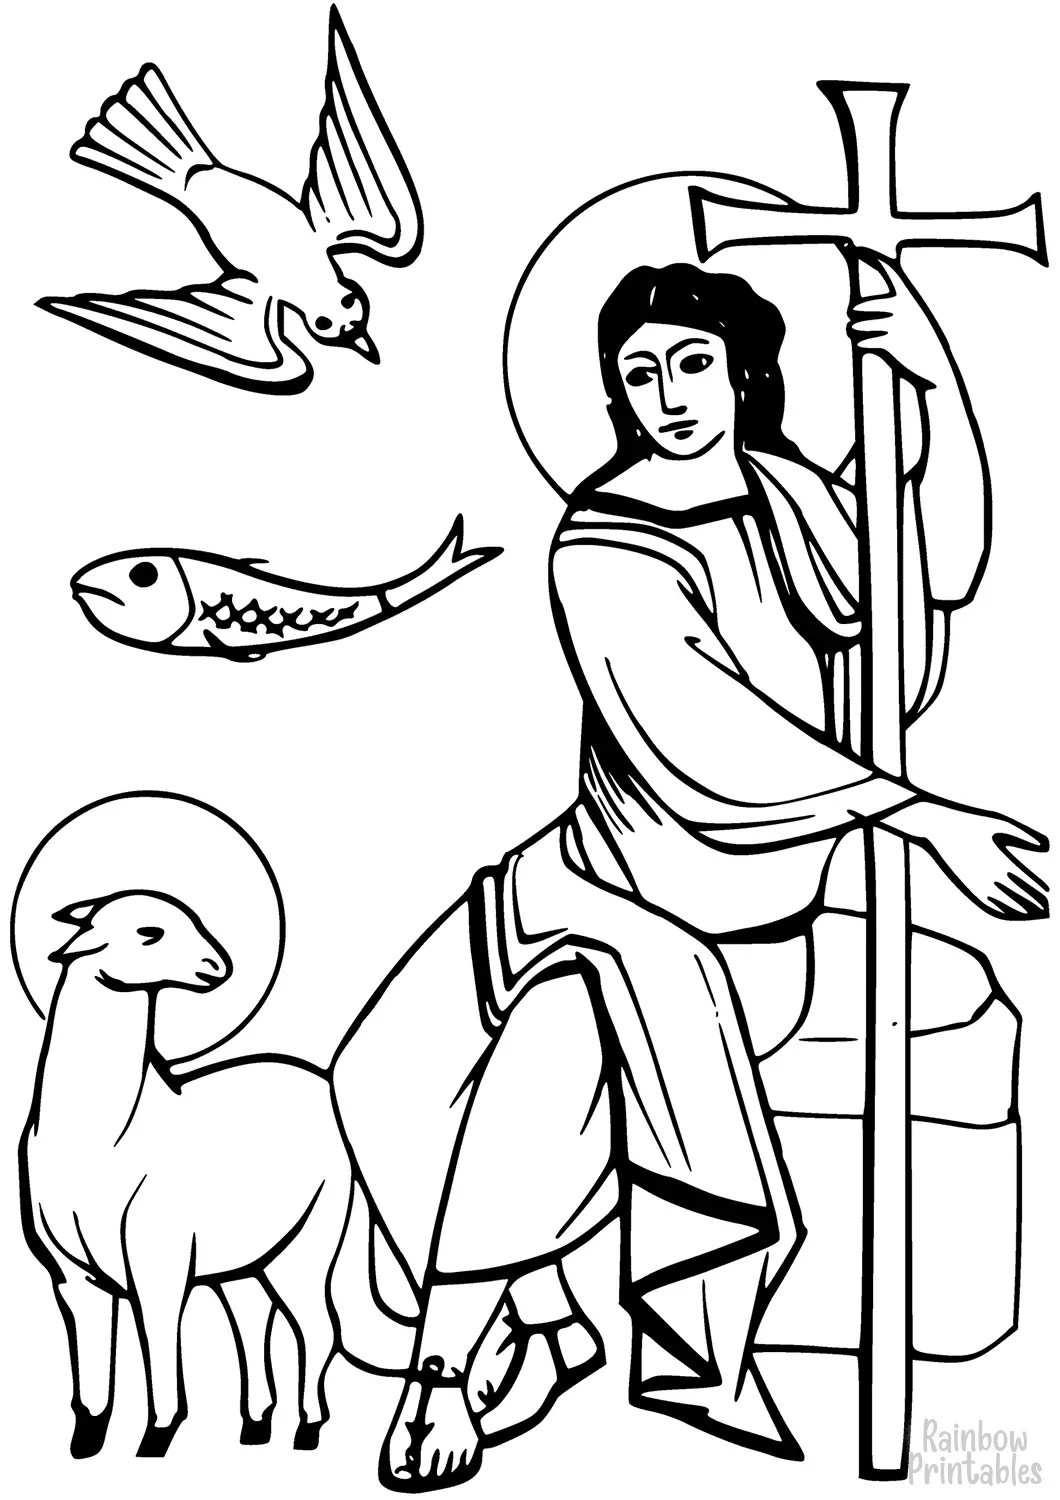 SIMPLE-EASY-line-drawings-Dove-Lamb-of-God-Cross-coloring-page-for-kids